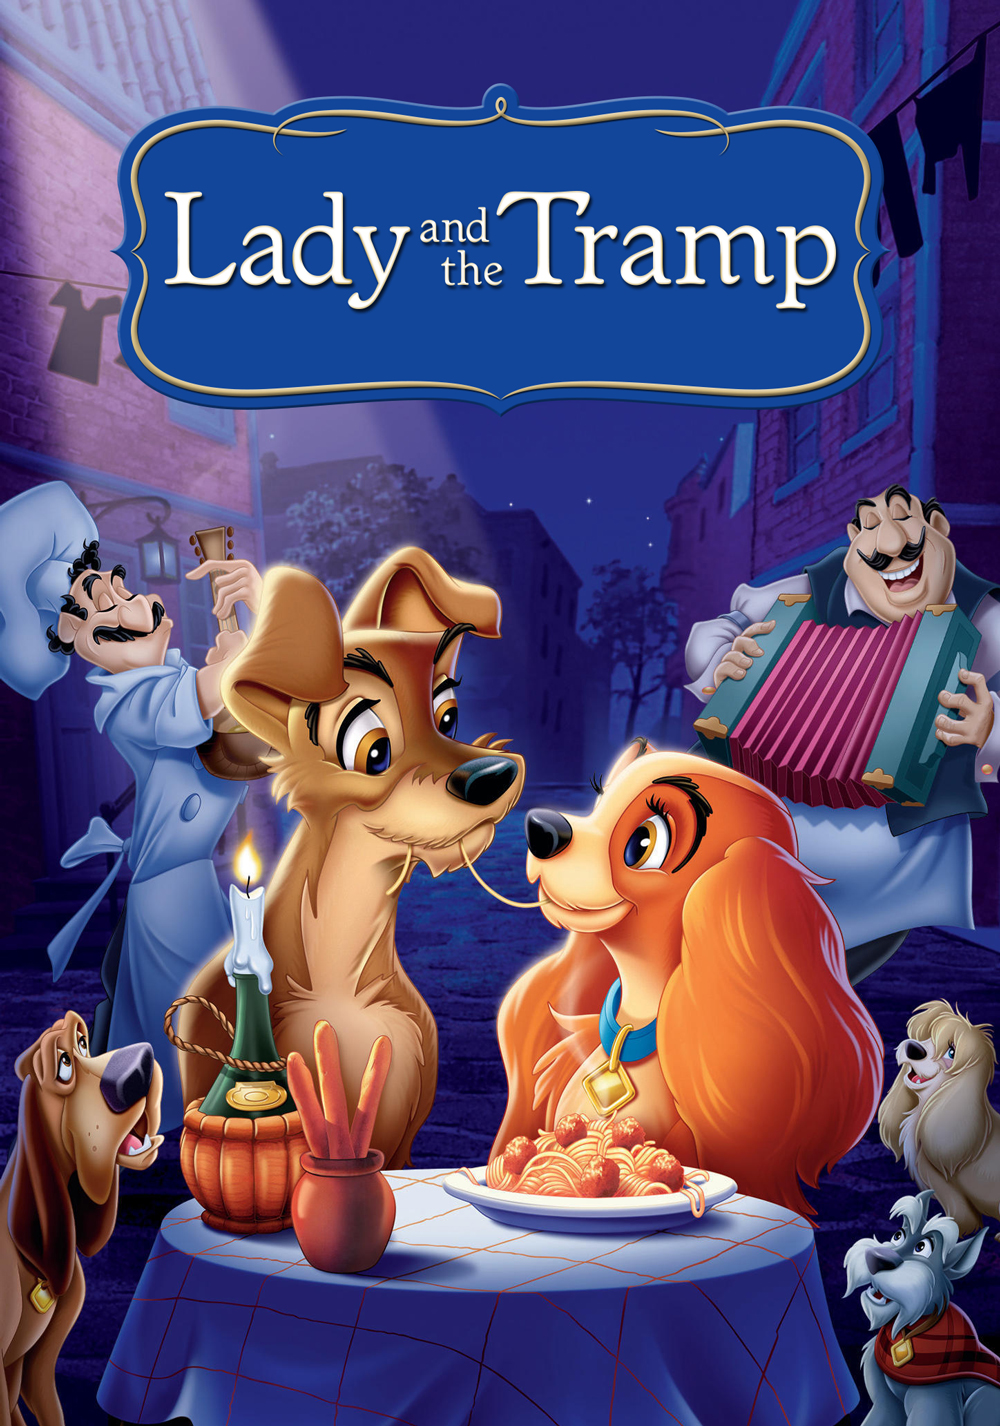 lady-and-the-tramp-522c3beea3444